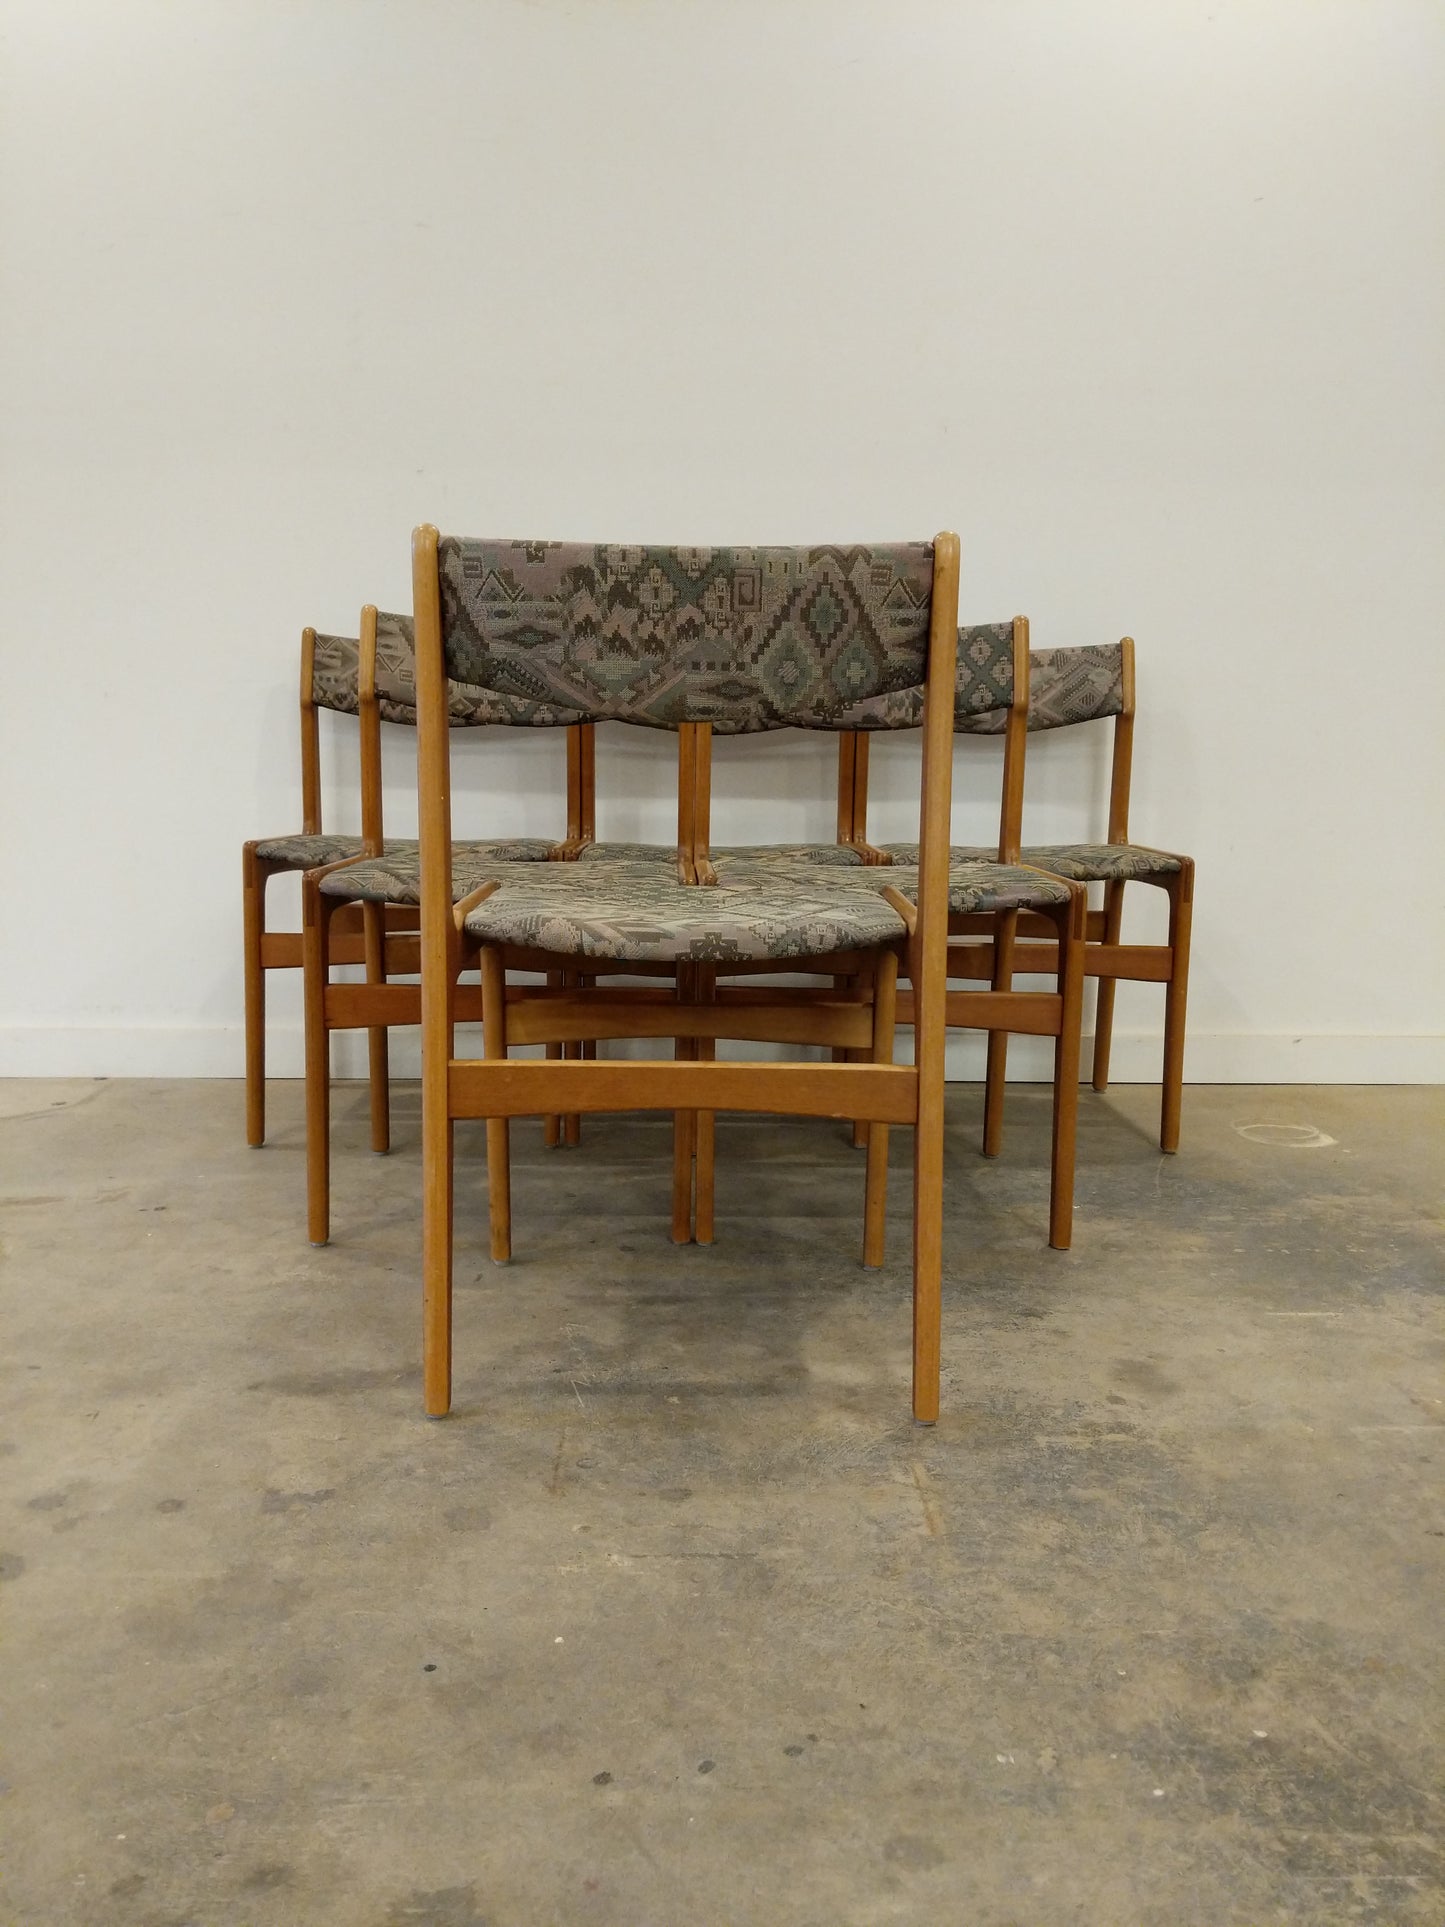 Set of 6 Vintage Danish Modern Dining Chairs